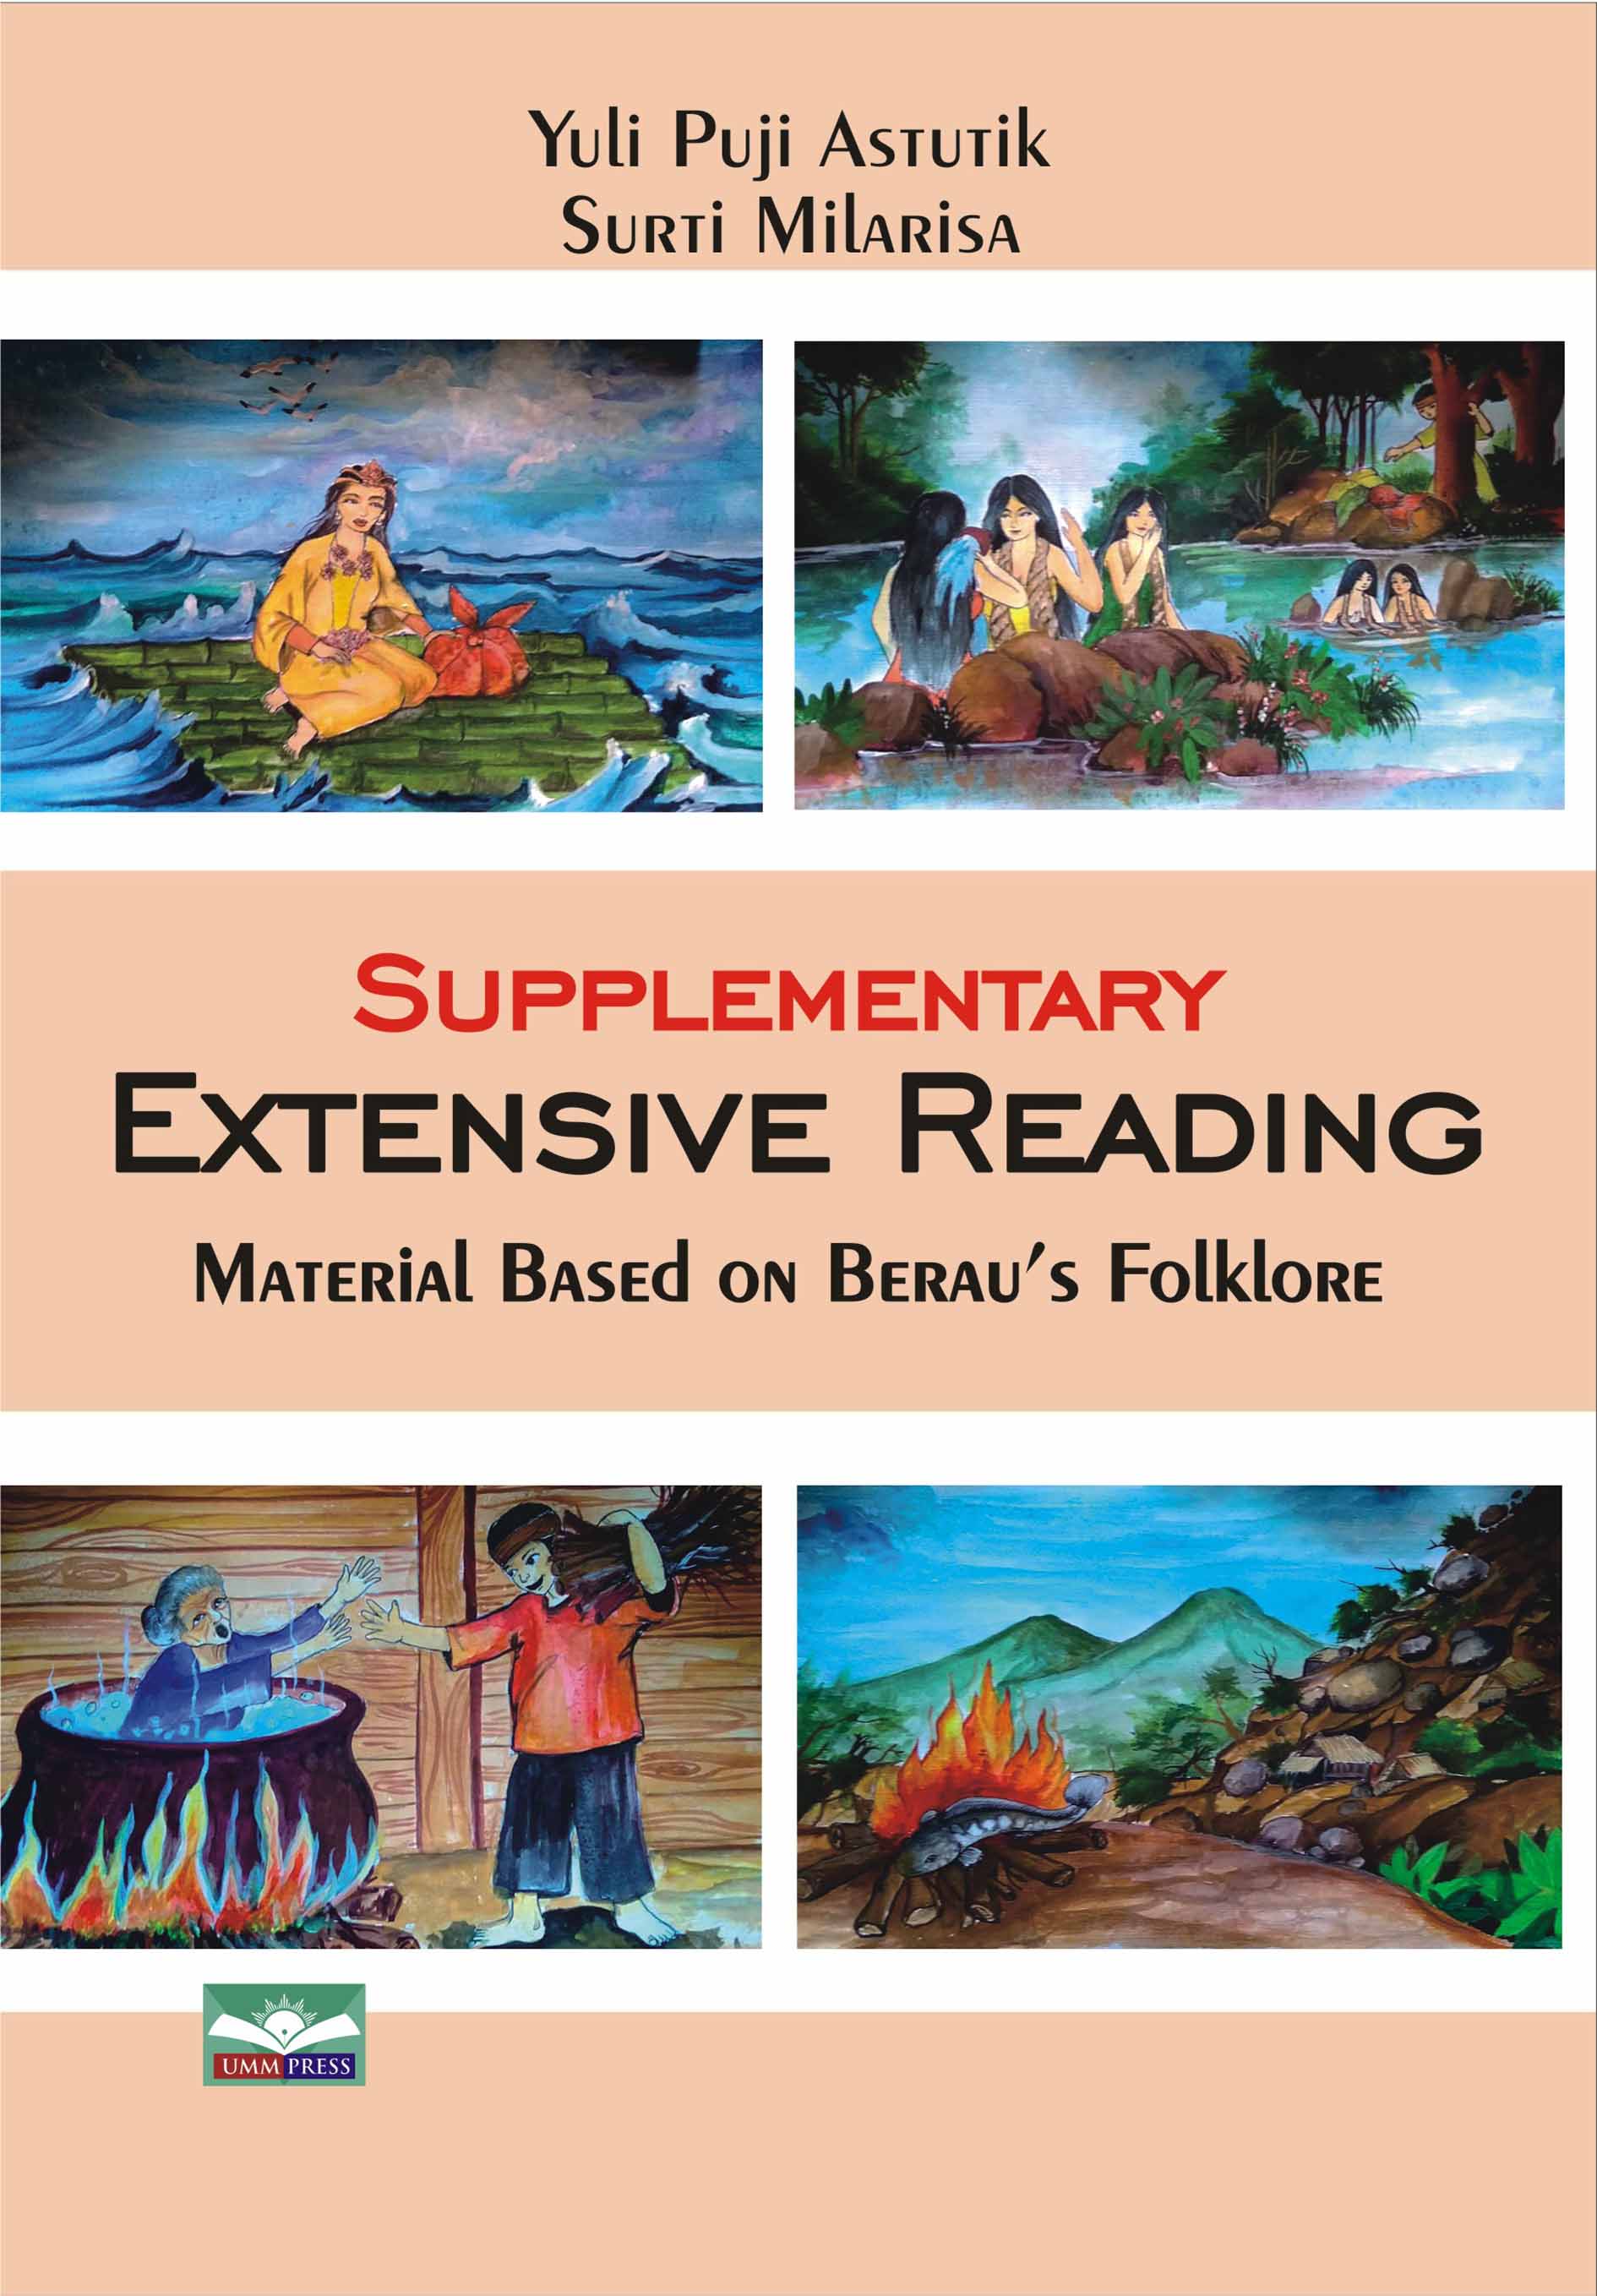 SUPPLEMENTARY EXTENSIVE READING: MATERIAL BASED ON BERAU’S FOLKLORE